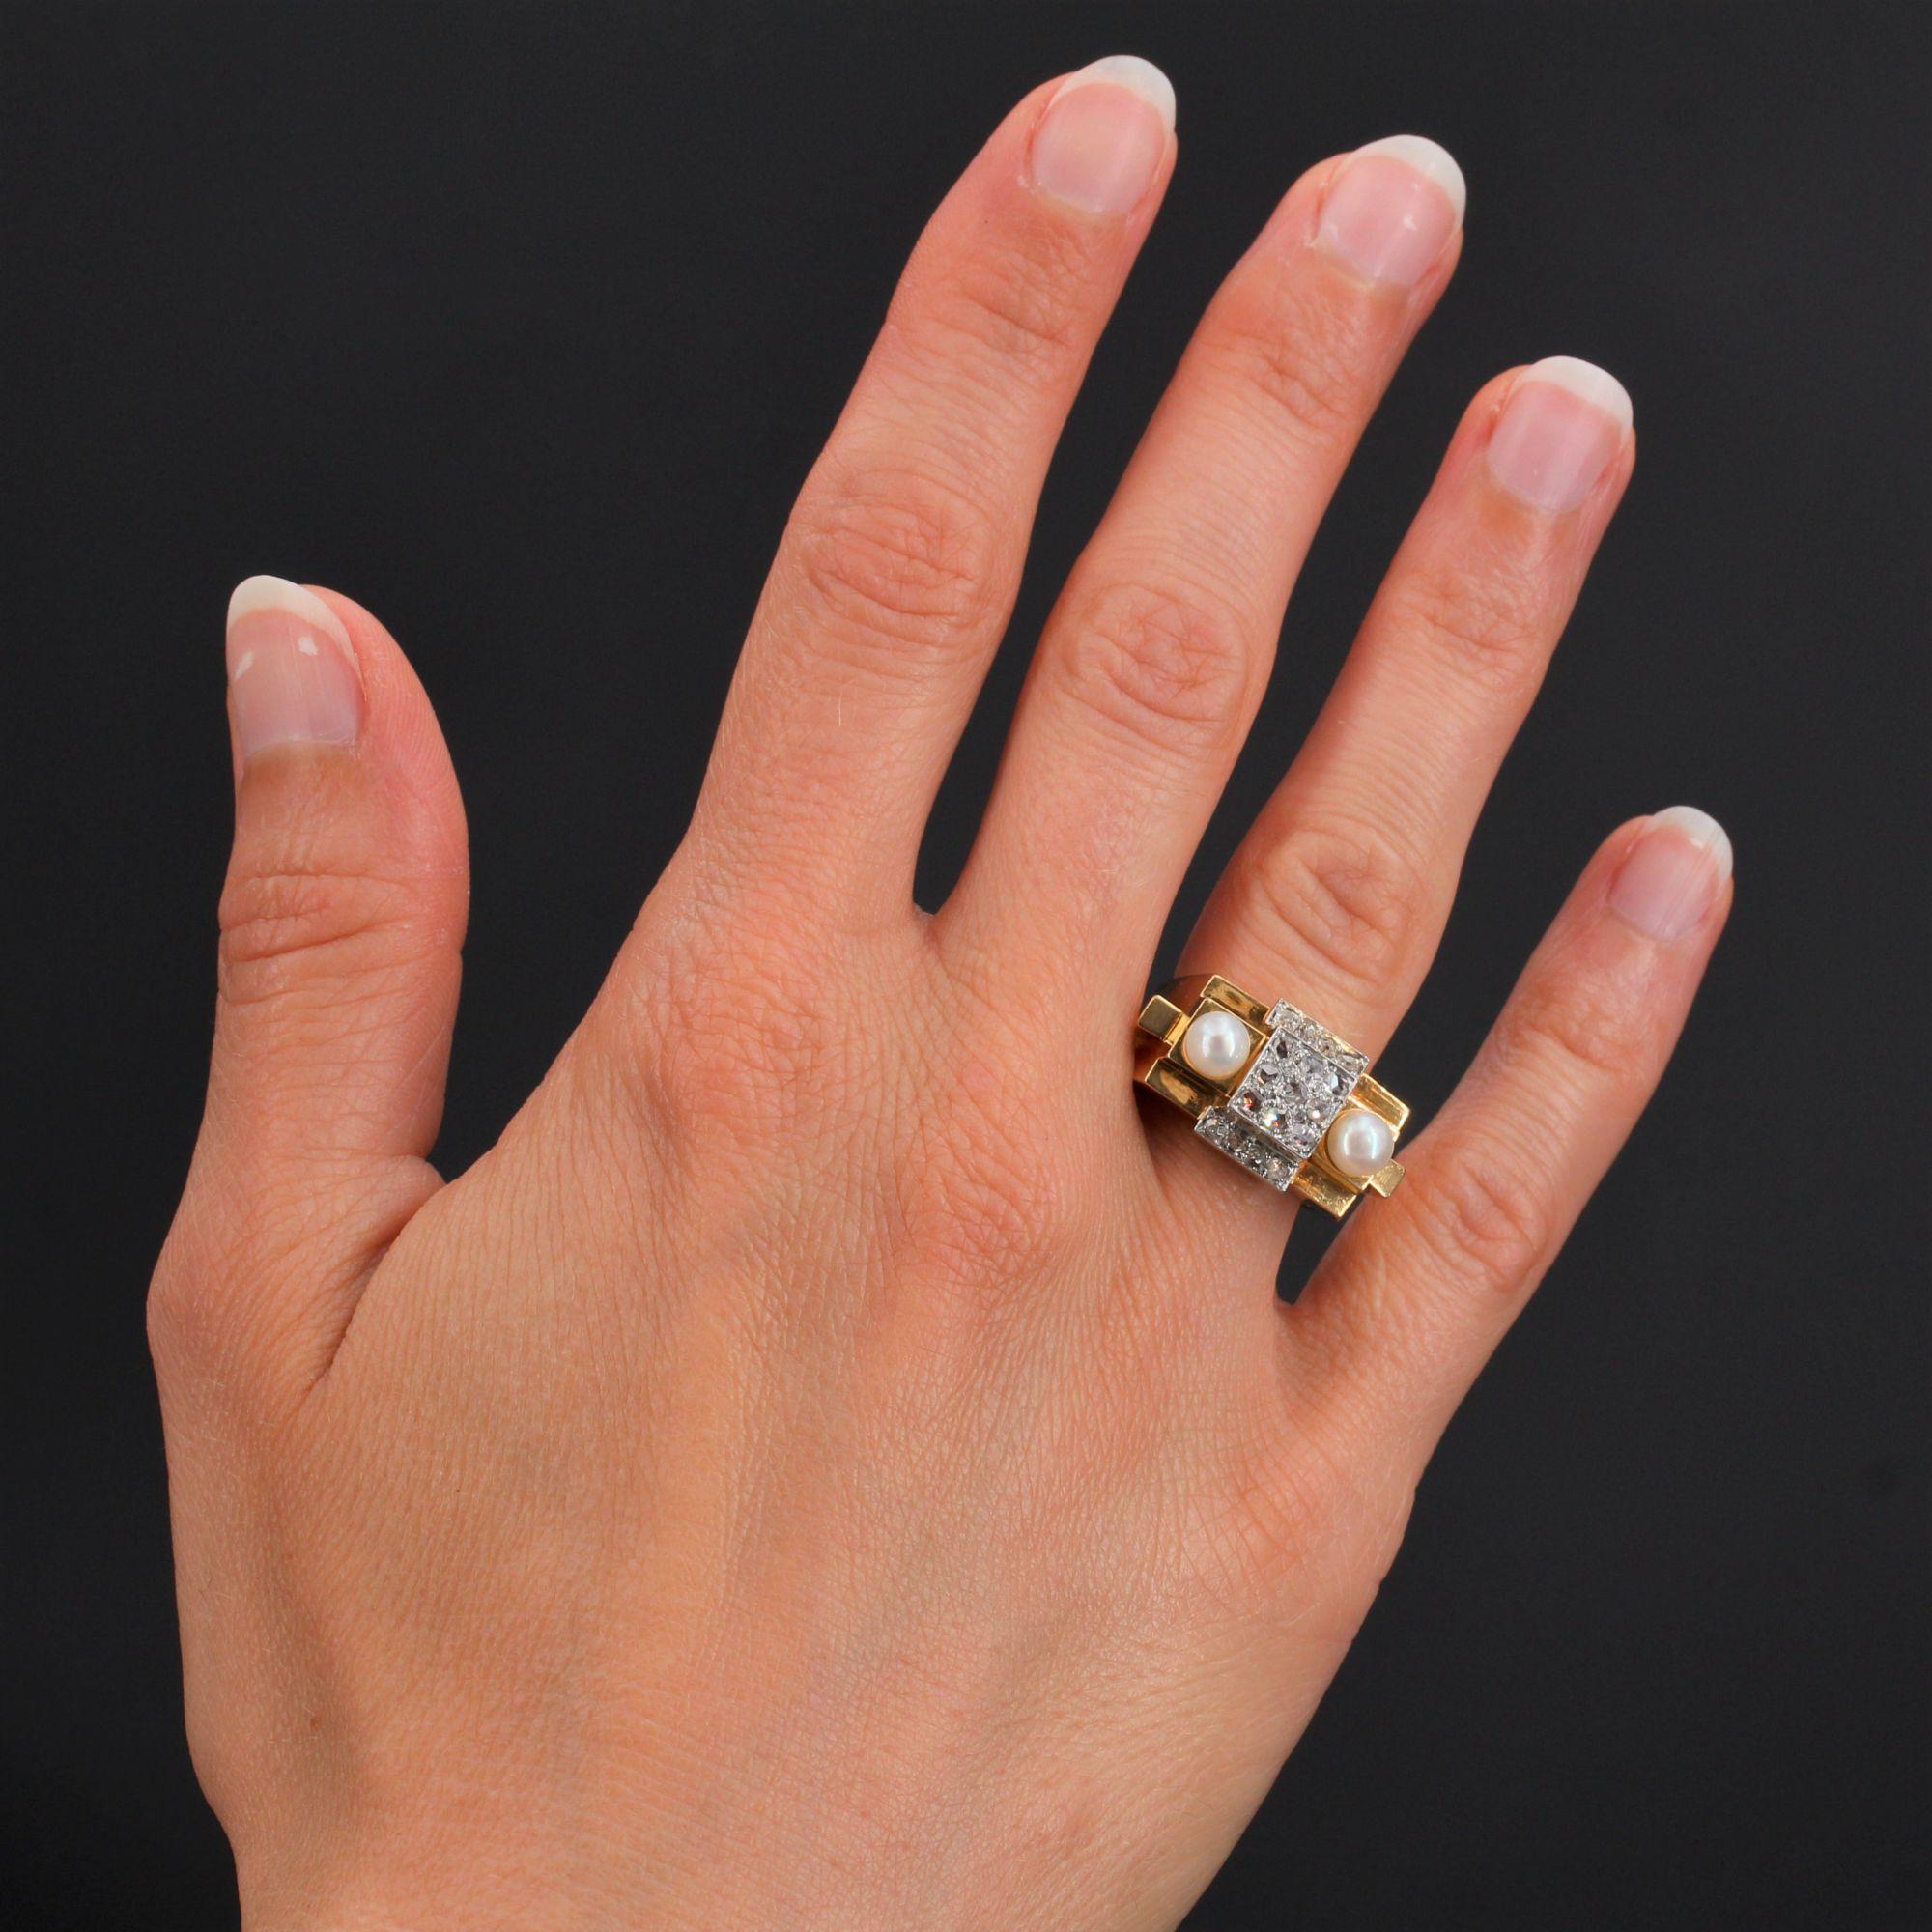 Ring in 18 karat yellow gold, eagle's head hallmark and platinum, dog's head hallmark.
Geometric, this tank ring has on its top three stepped patterns set with rose-cut diamonds, shouldered by natural pearls.
Total diamond weight : approximately